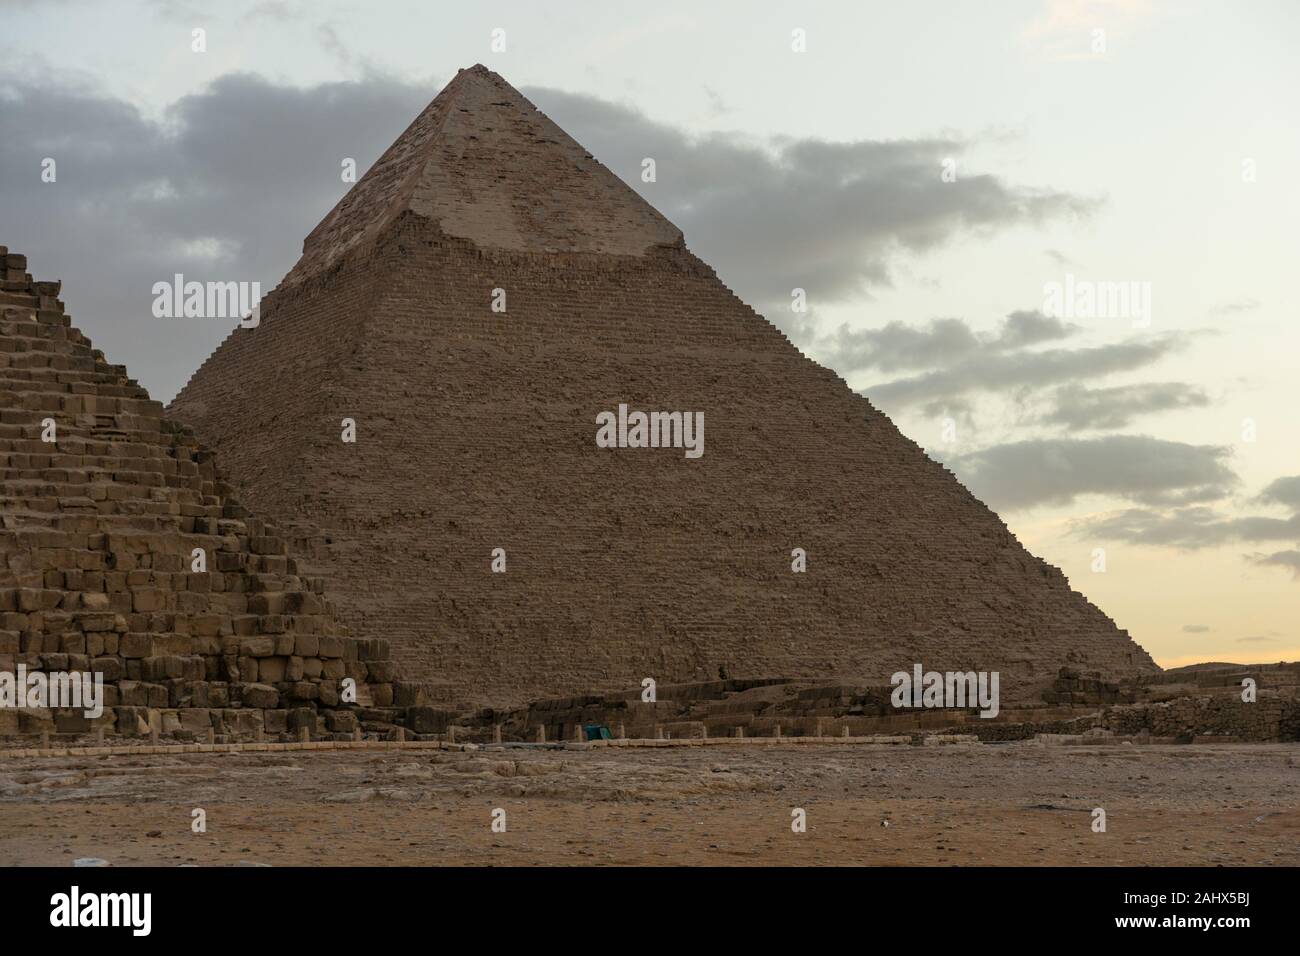 The Pyramid of Khafre behind the Pyramid of Khufu (Cheops) Stock Photo